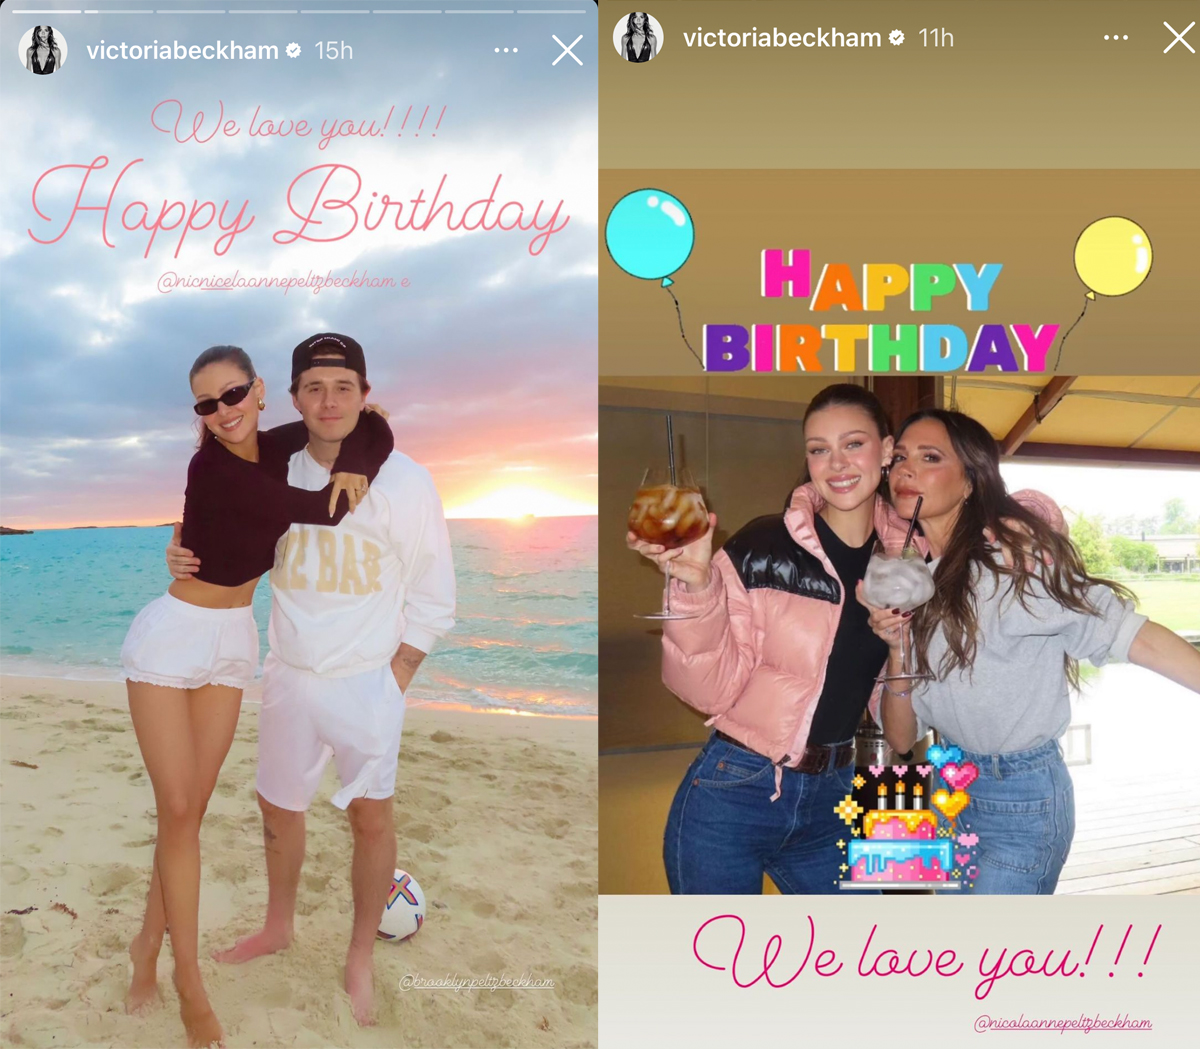 Victoria Beckham Gushes About Daughter-In-Law Nicola Peltz In Loving B-Day Tribute!